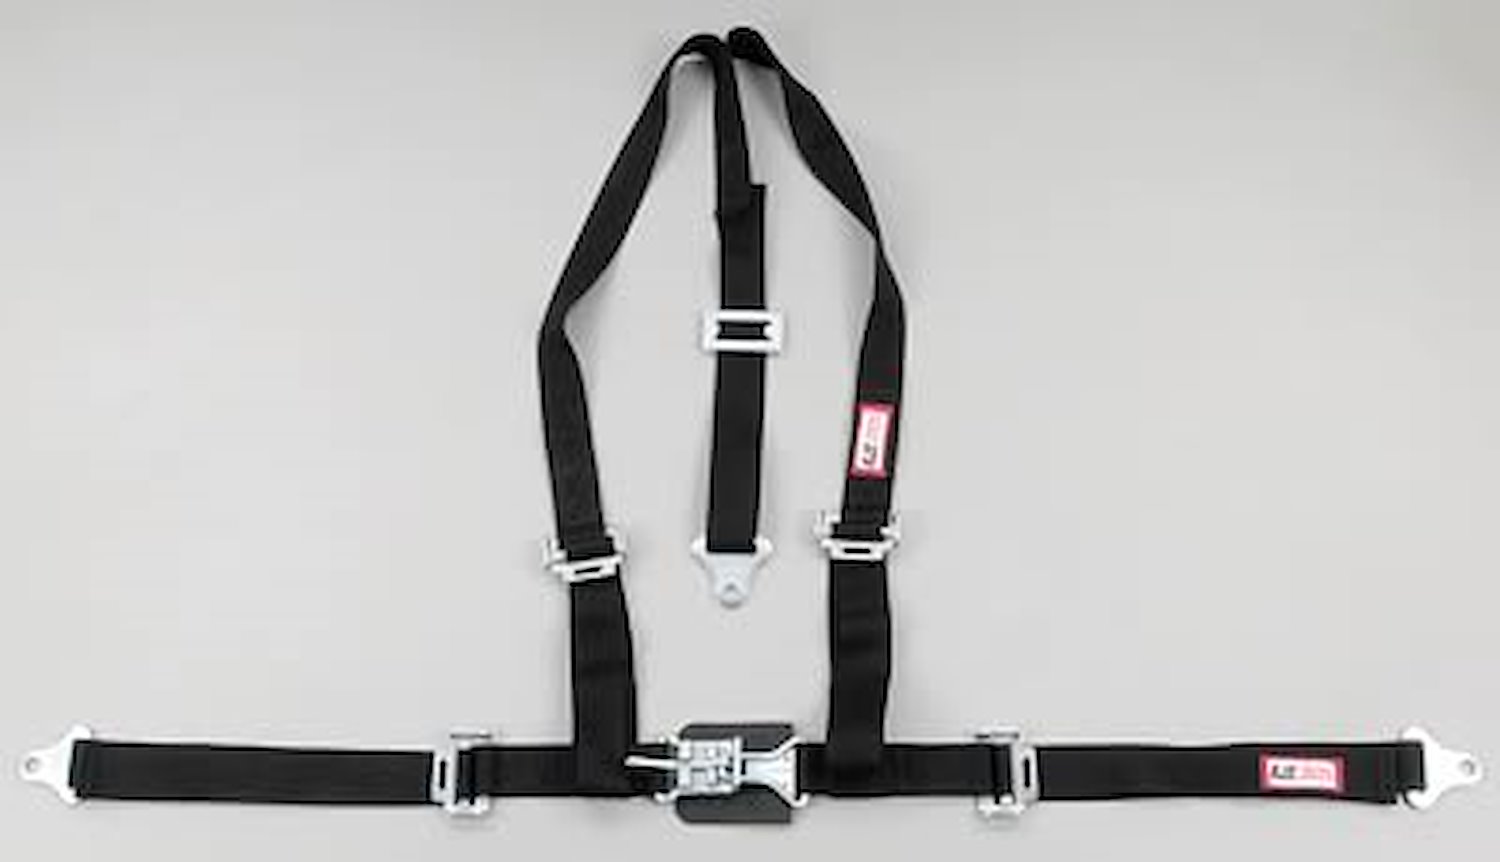 NON-SFI L&L HARNESS 3 PULL DOWN Lap Belt w/Adjuster SNAP 2 S.H. Y FLOOR Mount WRAP/SNAP GRAY